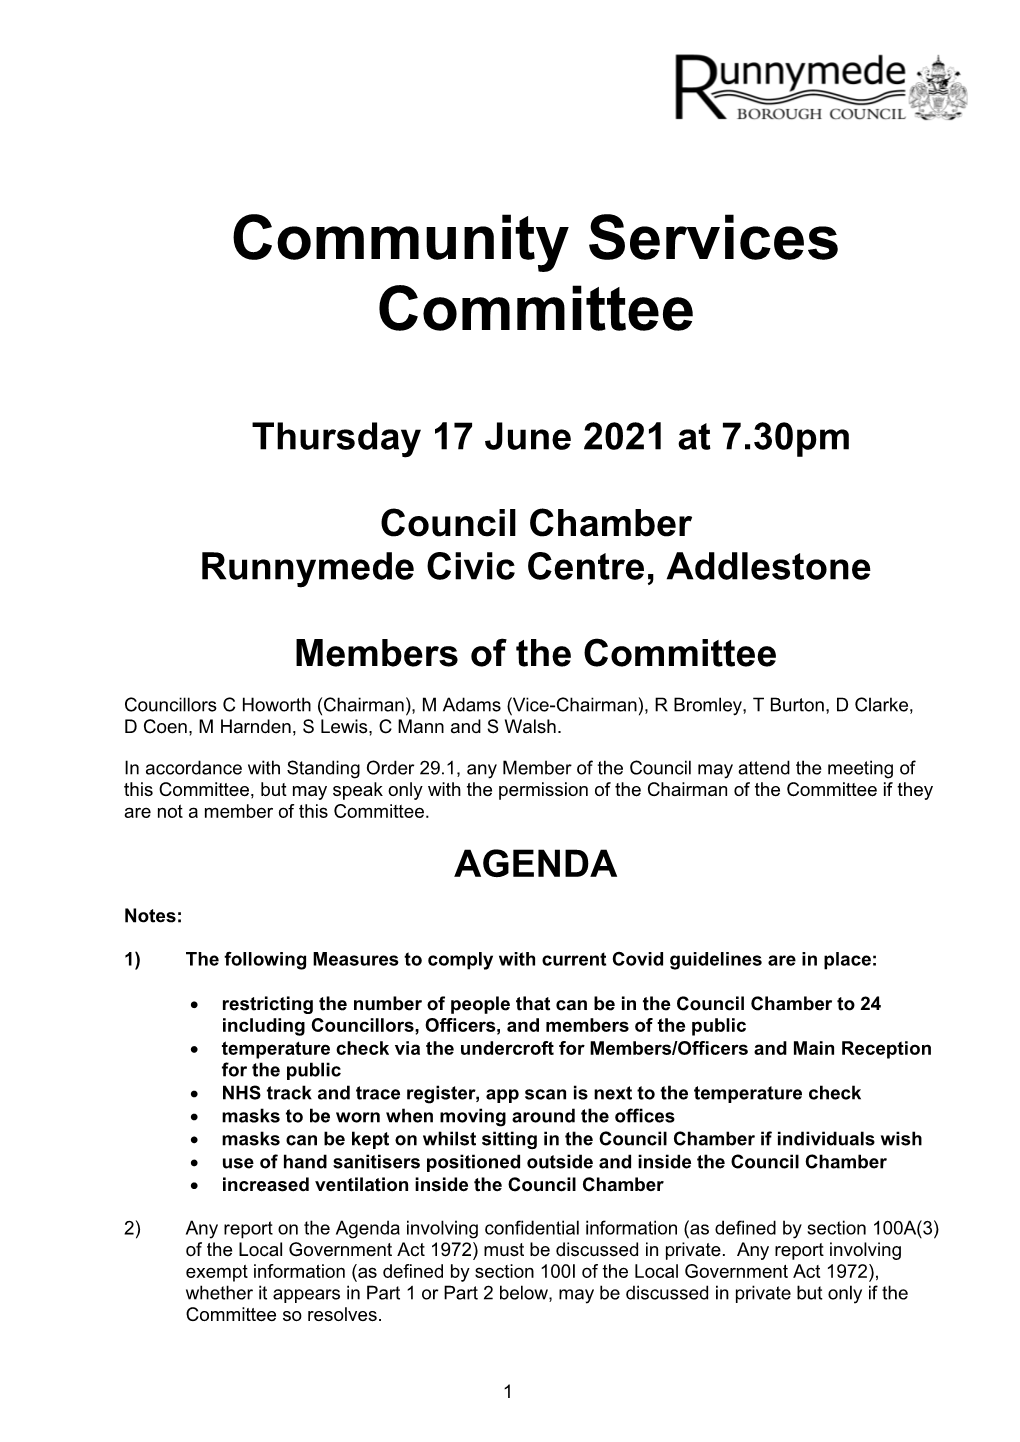 Community Services Committee